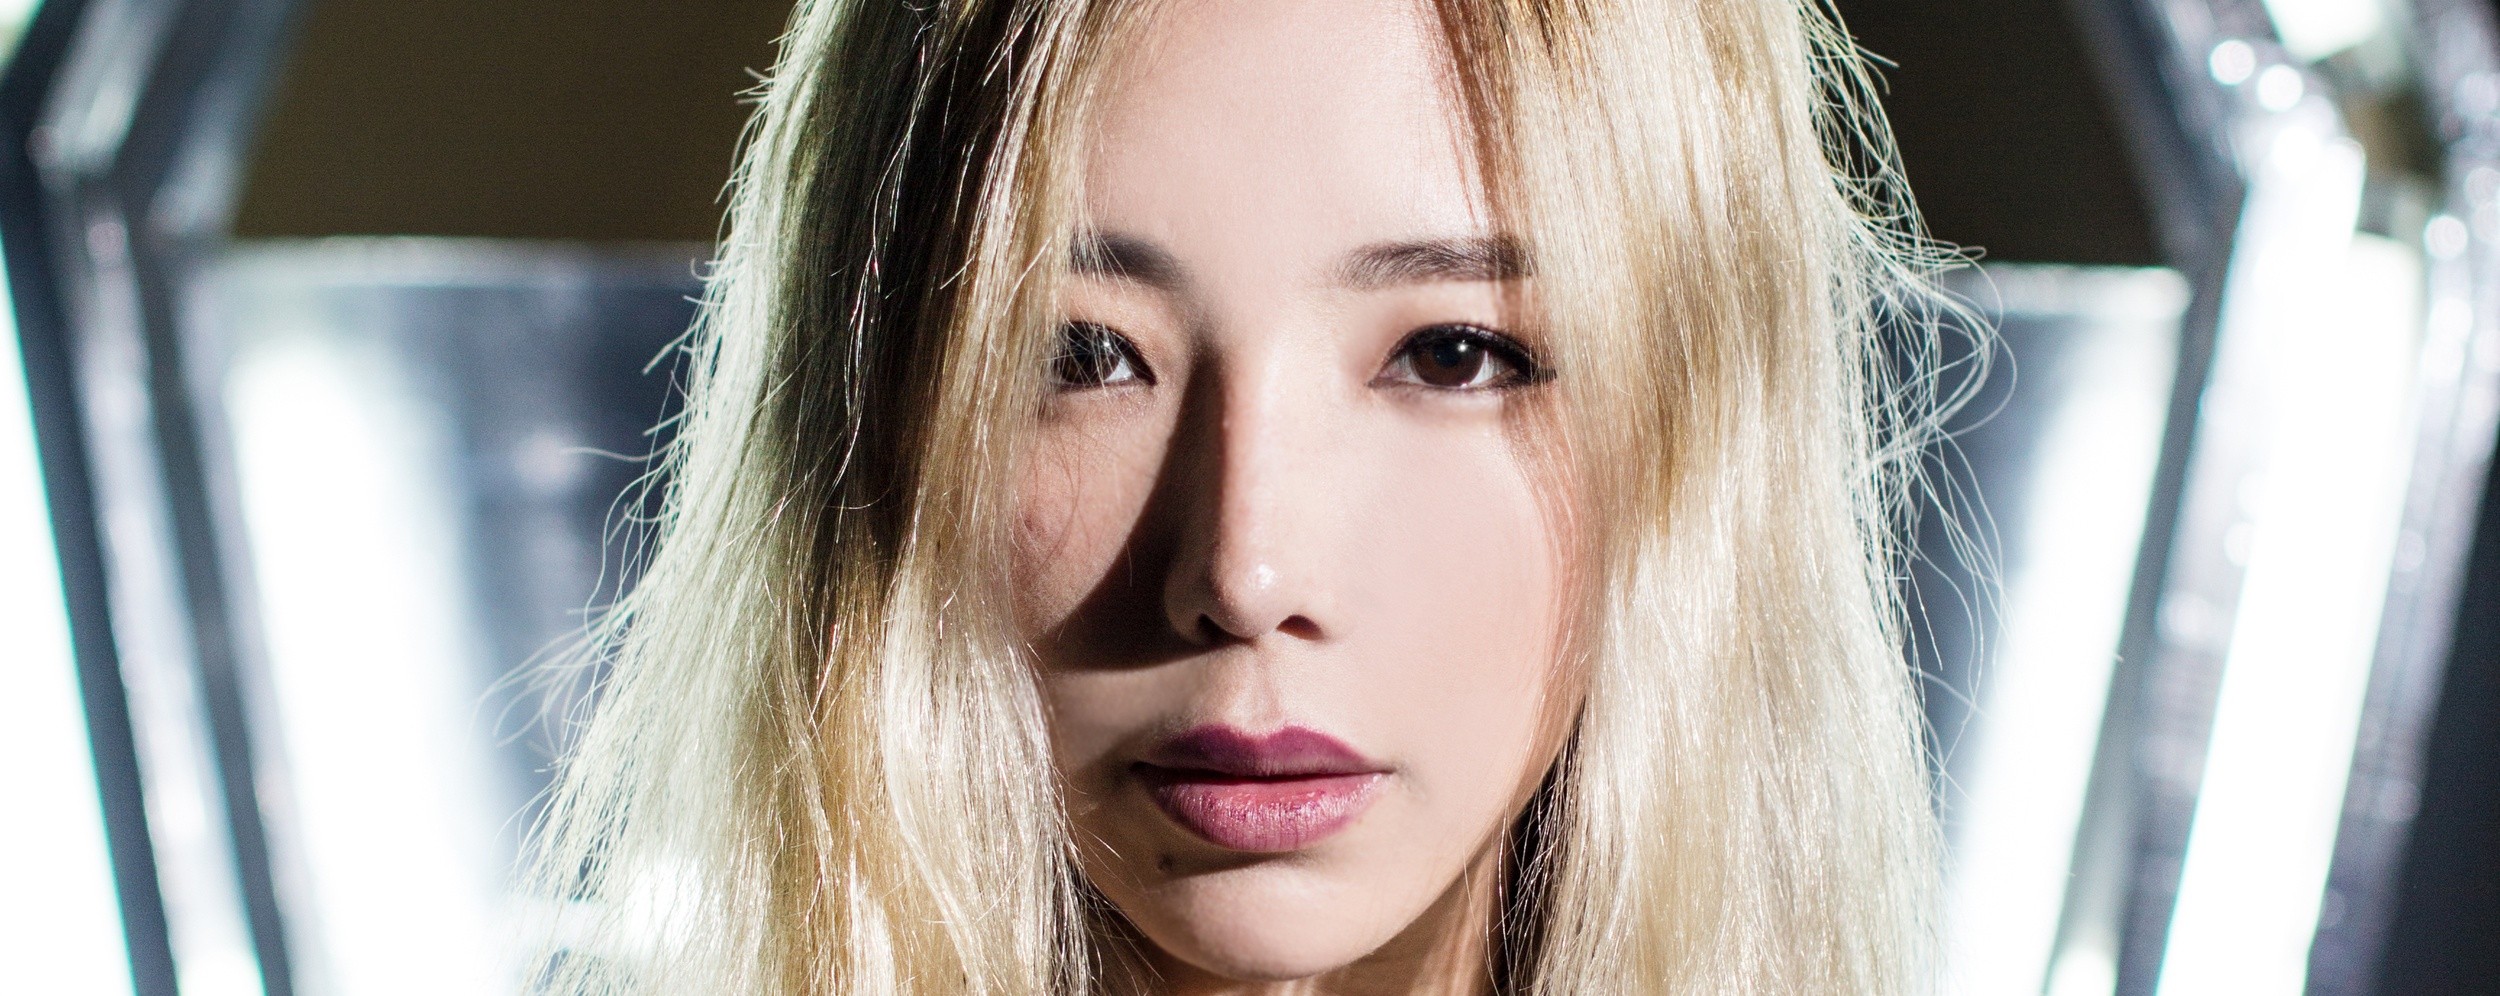 TOKiMONSTA presented by Collective Minds & Kilo Lounge